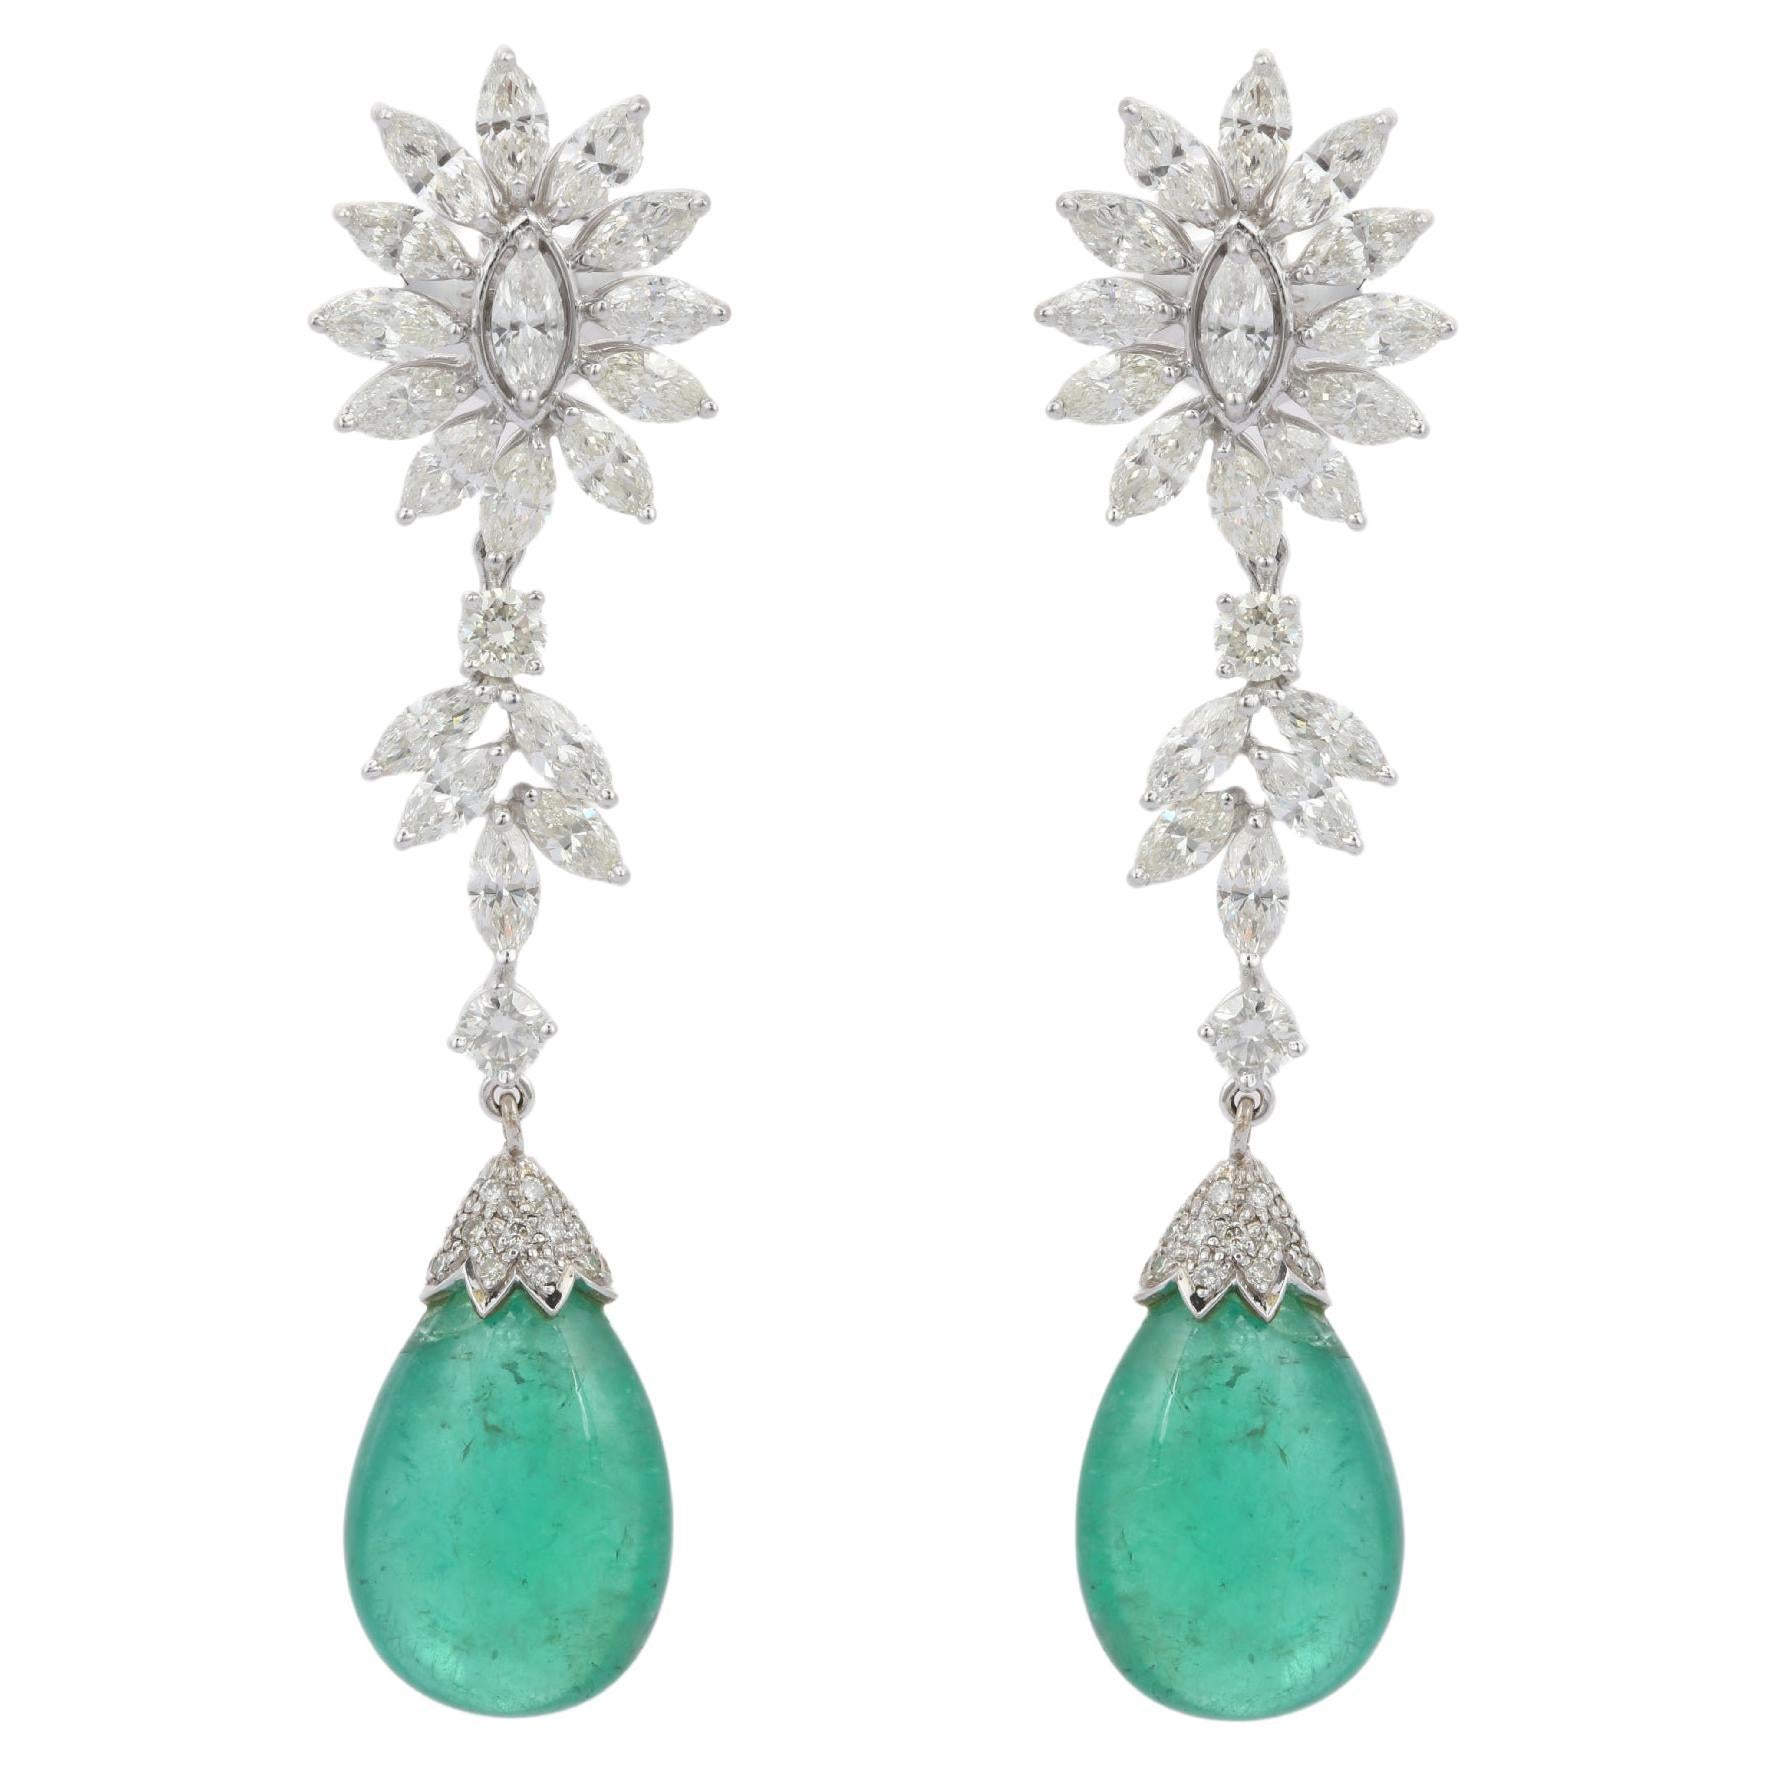 18kt Solid White Gold Diamond and 31.52 ct Drop Emerald Dangle Earrings